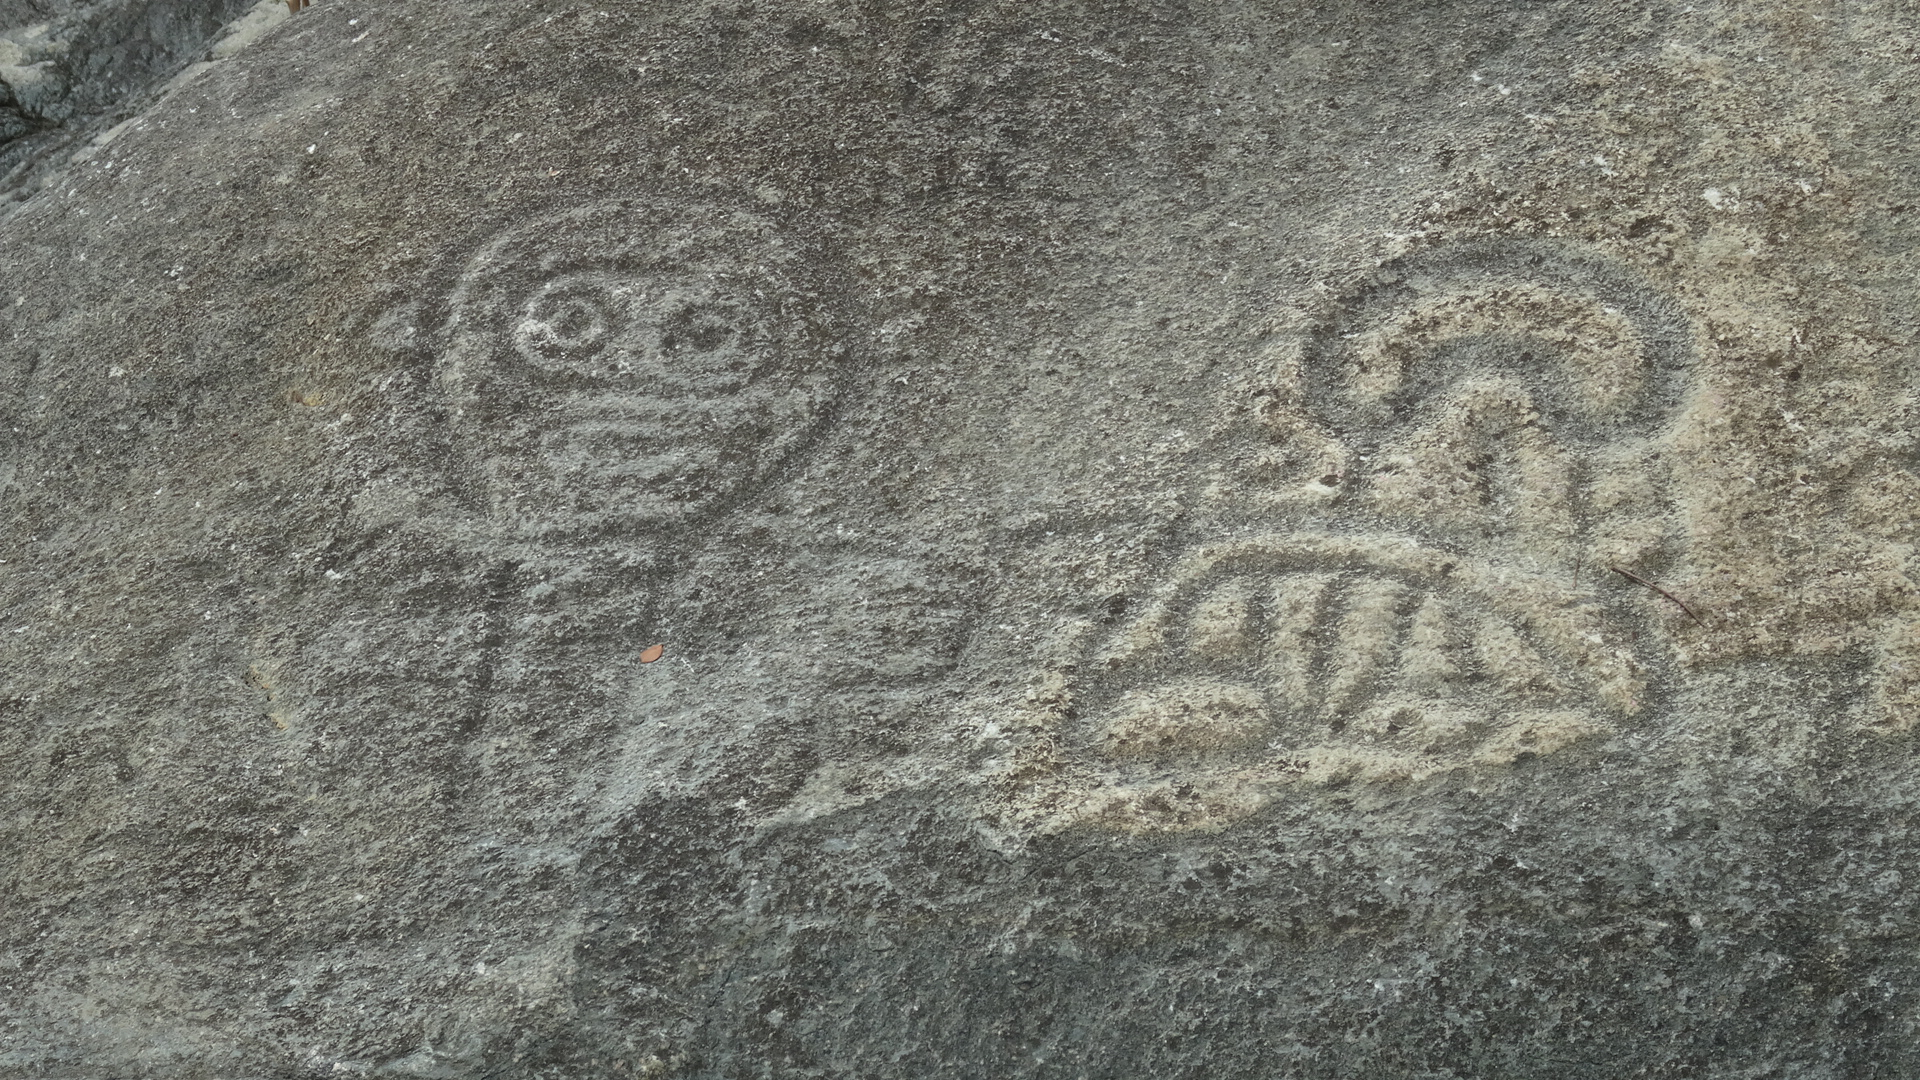 63. Petroglyphs carved by Tainos, St John